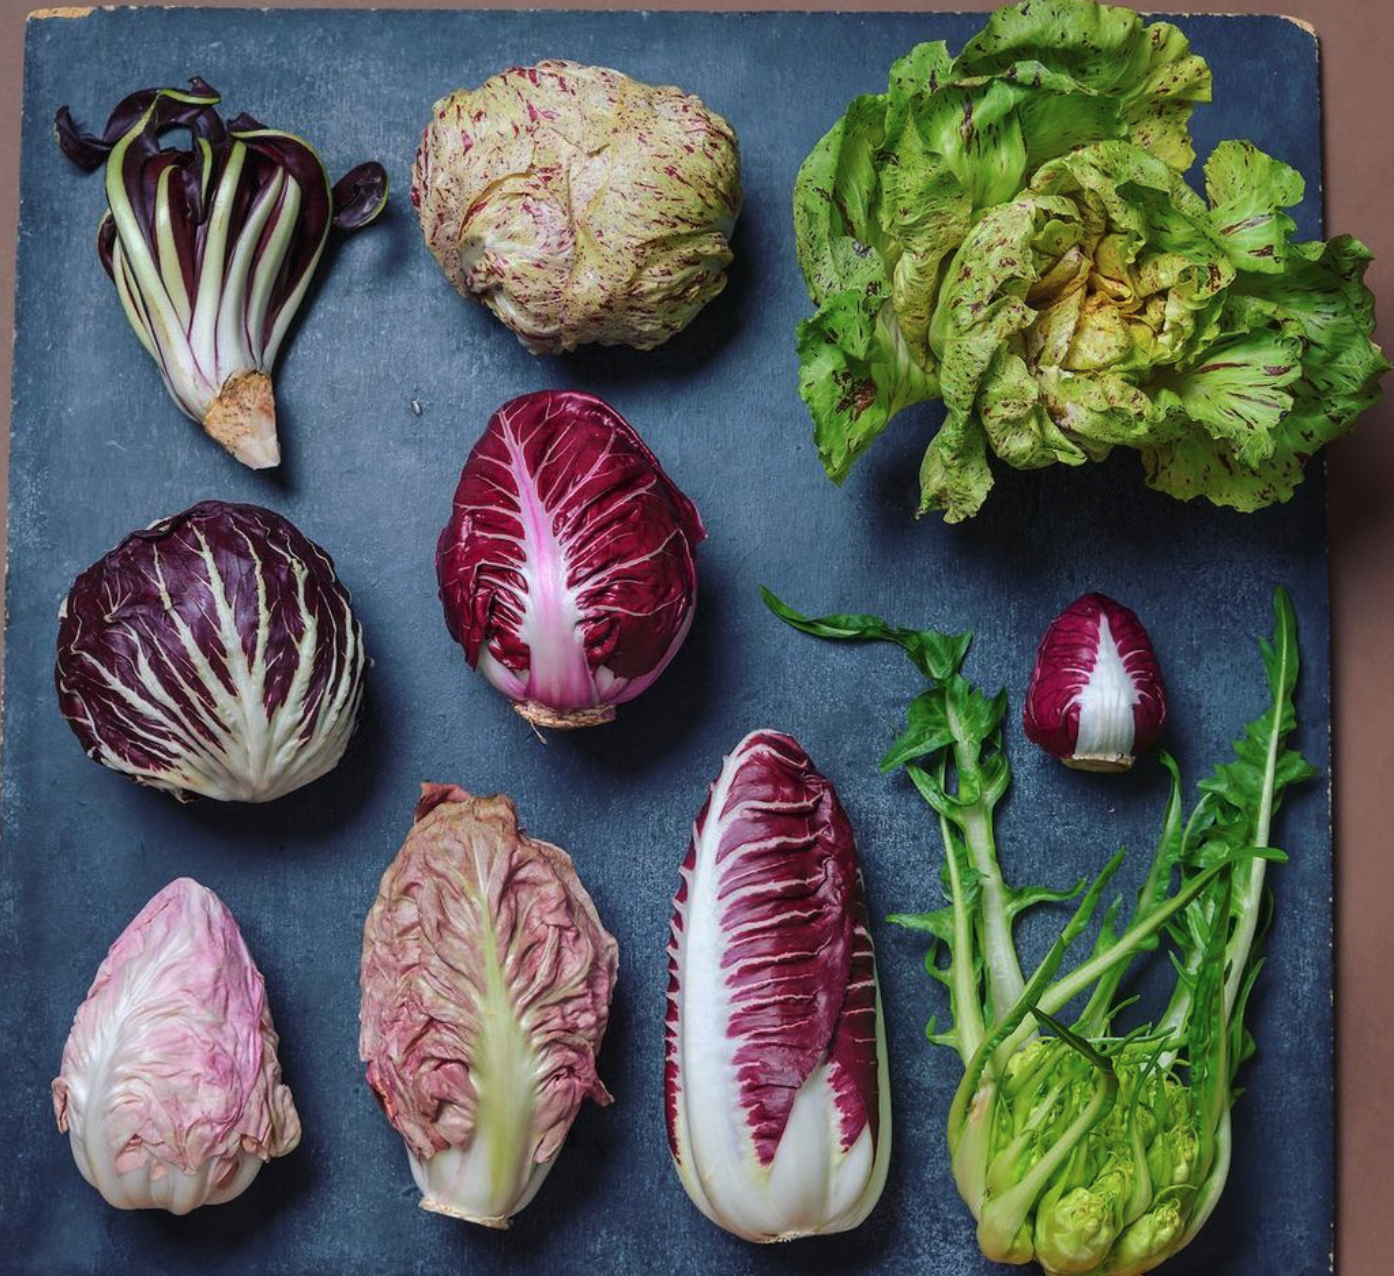 Image of chicories by Shawn Linehan